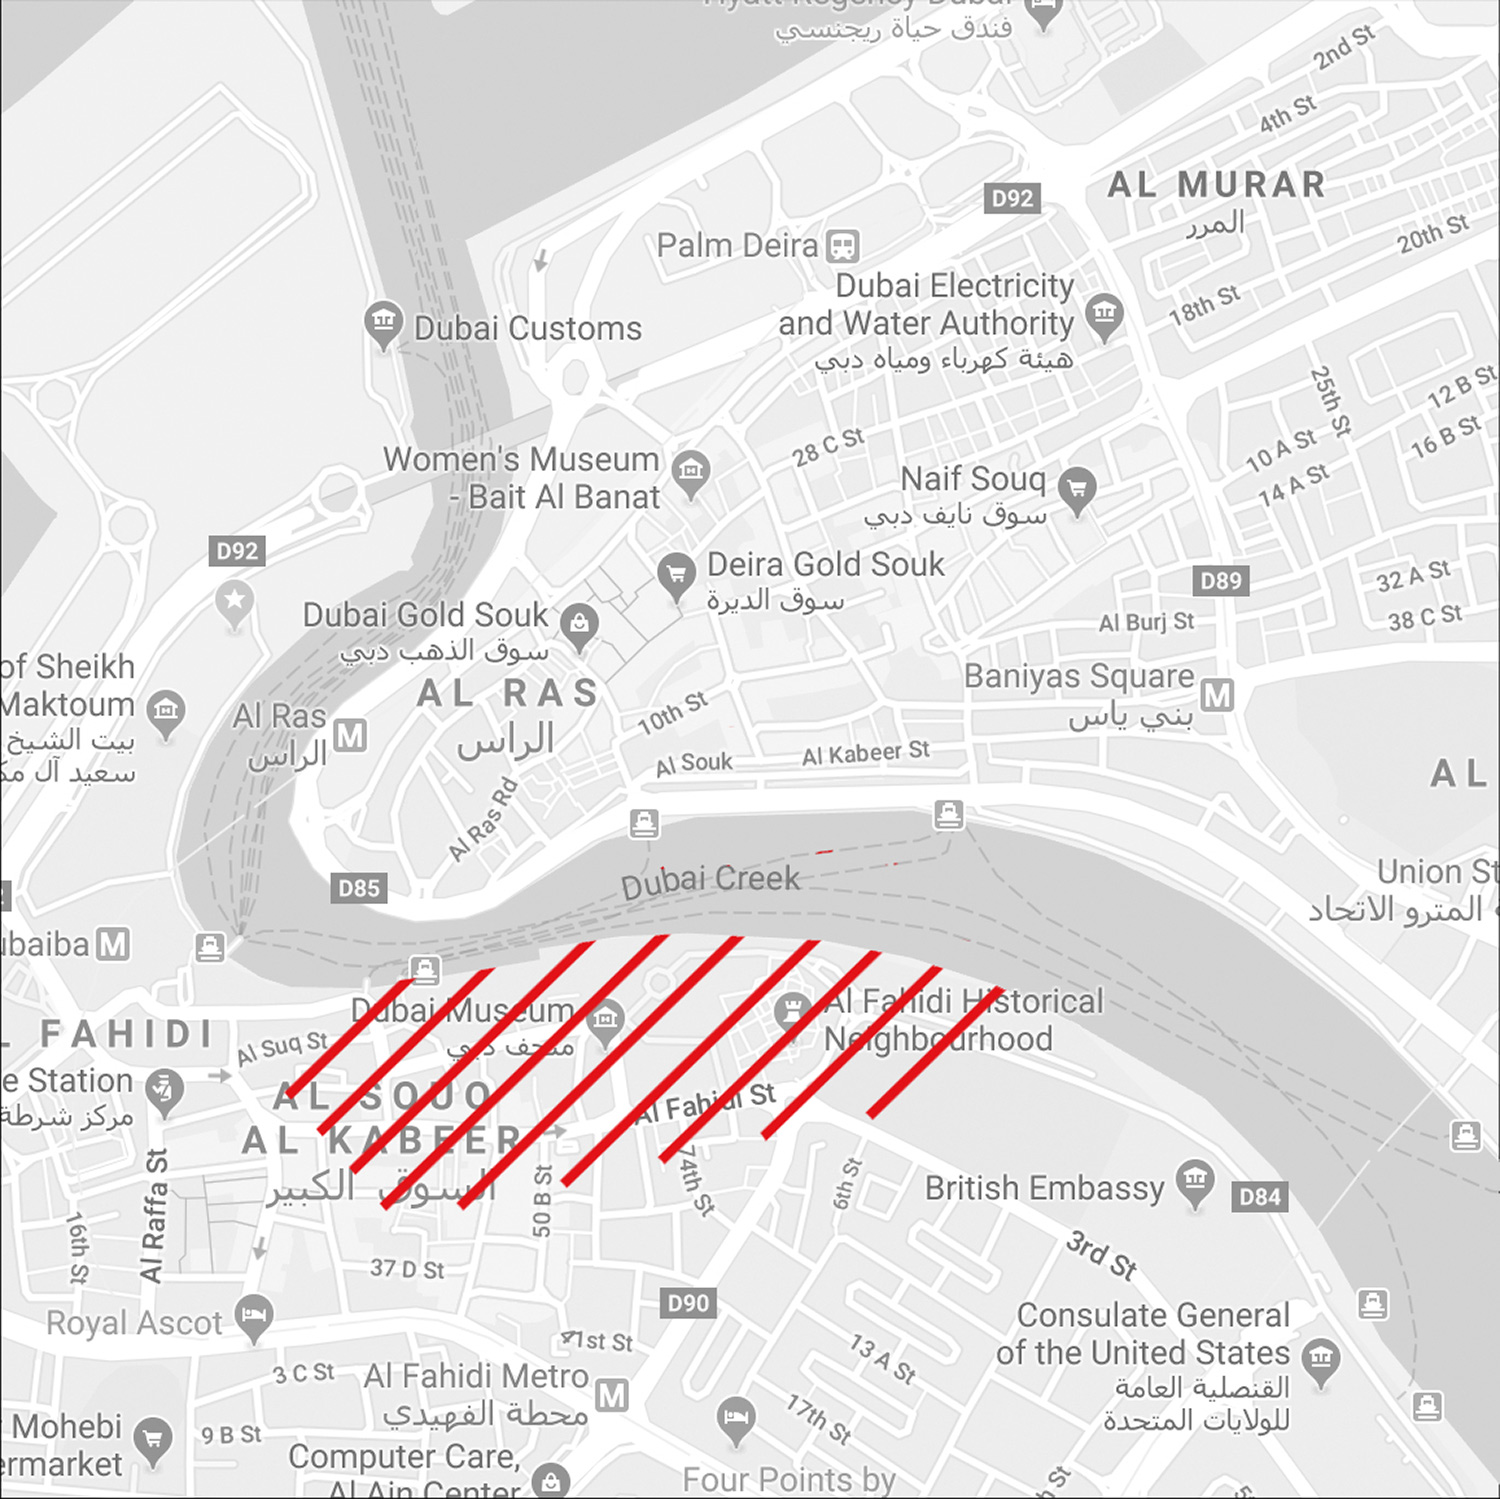  Modern day map of Bur Dubai  Highlighted in Red is the approximate area enclosed by the Historic Boundary wall  Image source: Google Earth 